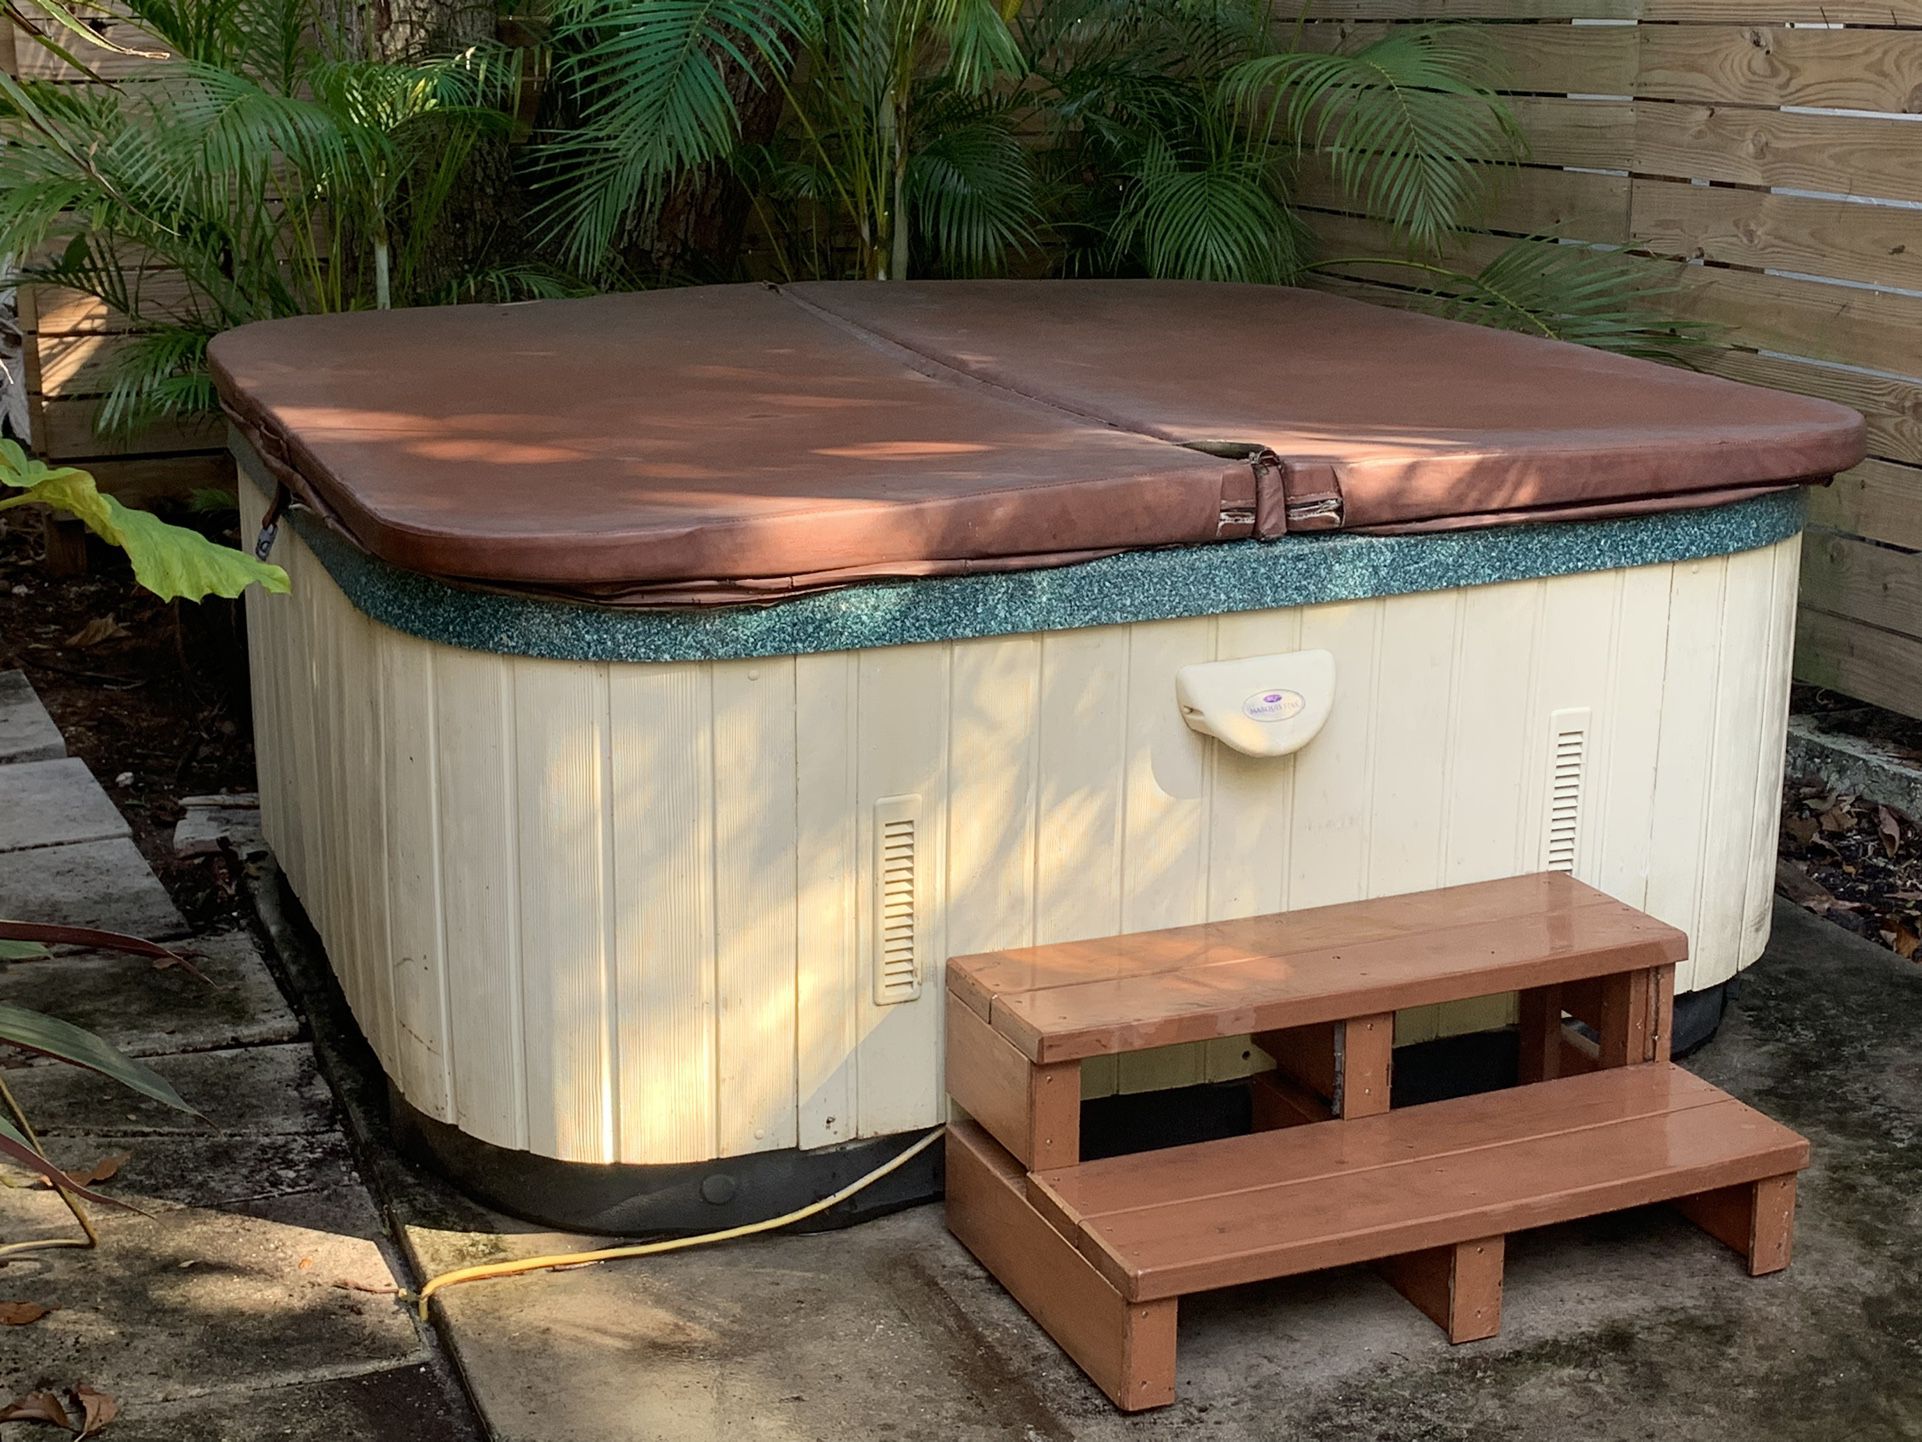 Working Hot Tub For Sale